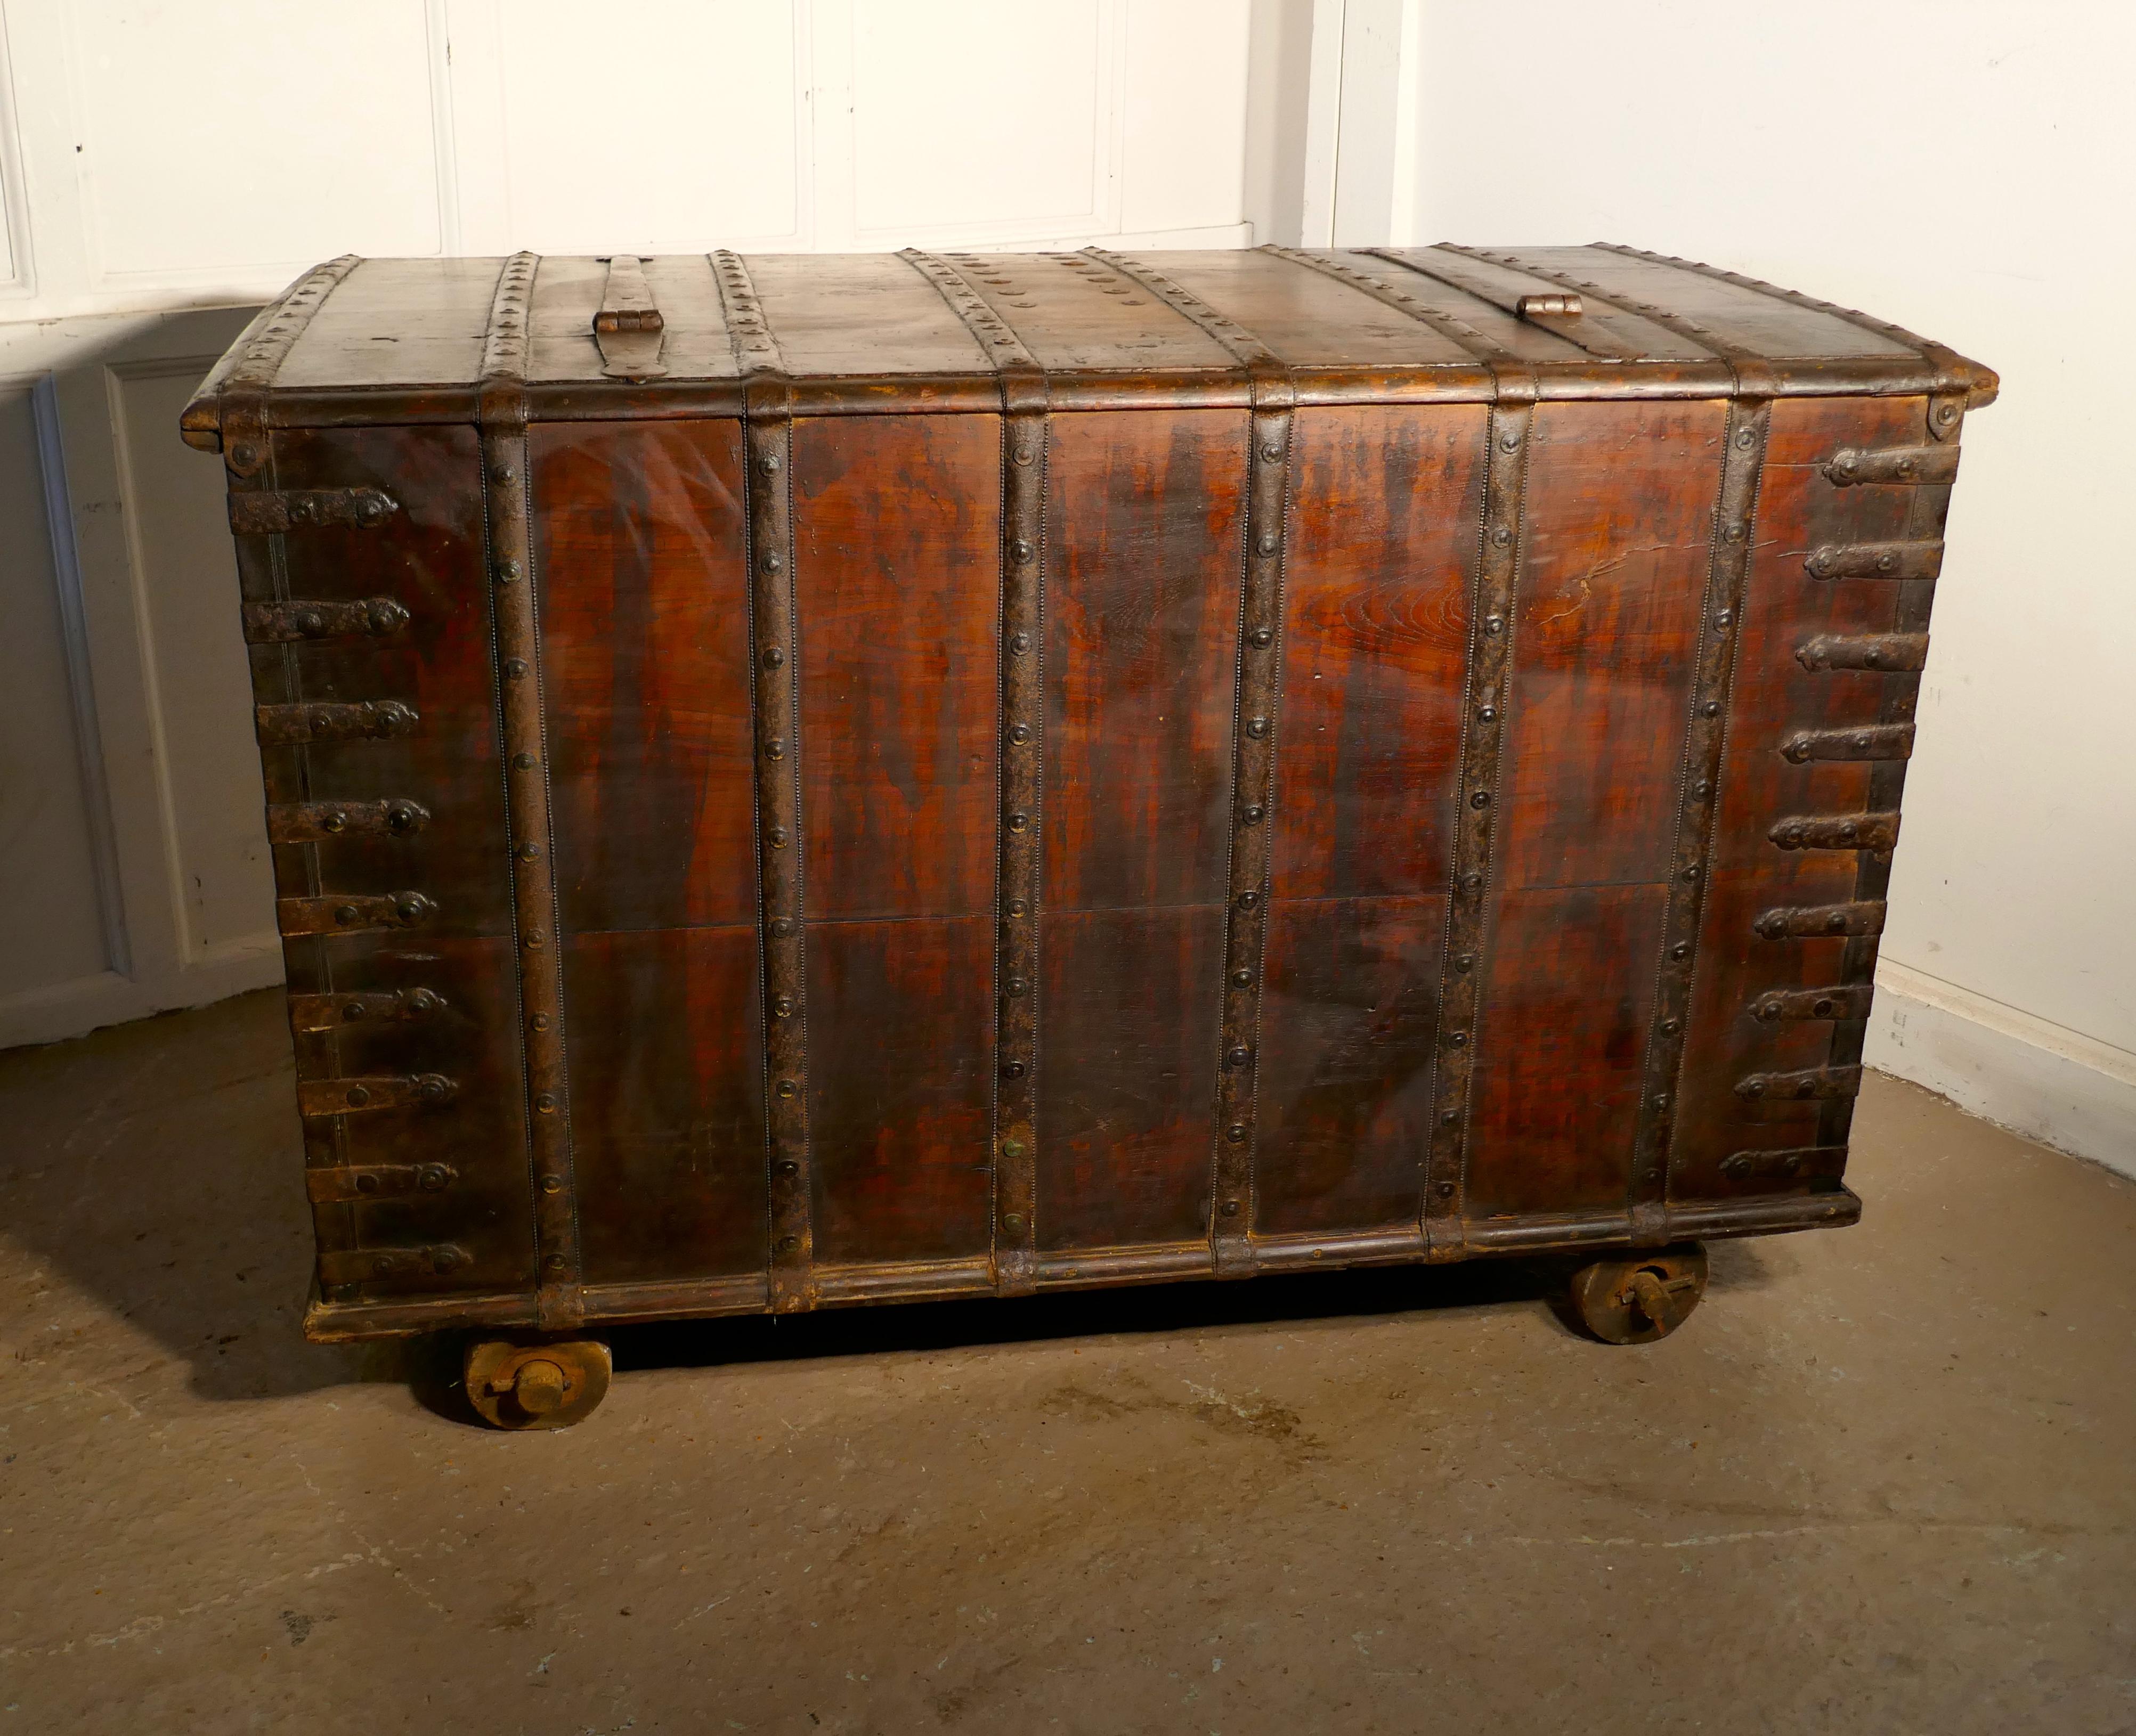 Antique iron bound merchants chest with hidden compartments. 

The chest is very heavy, it has a great deal of thick iron banding and brass and iron studs both for strength and decoration. 
Chests like these were made for merchants to transport